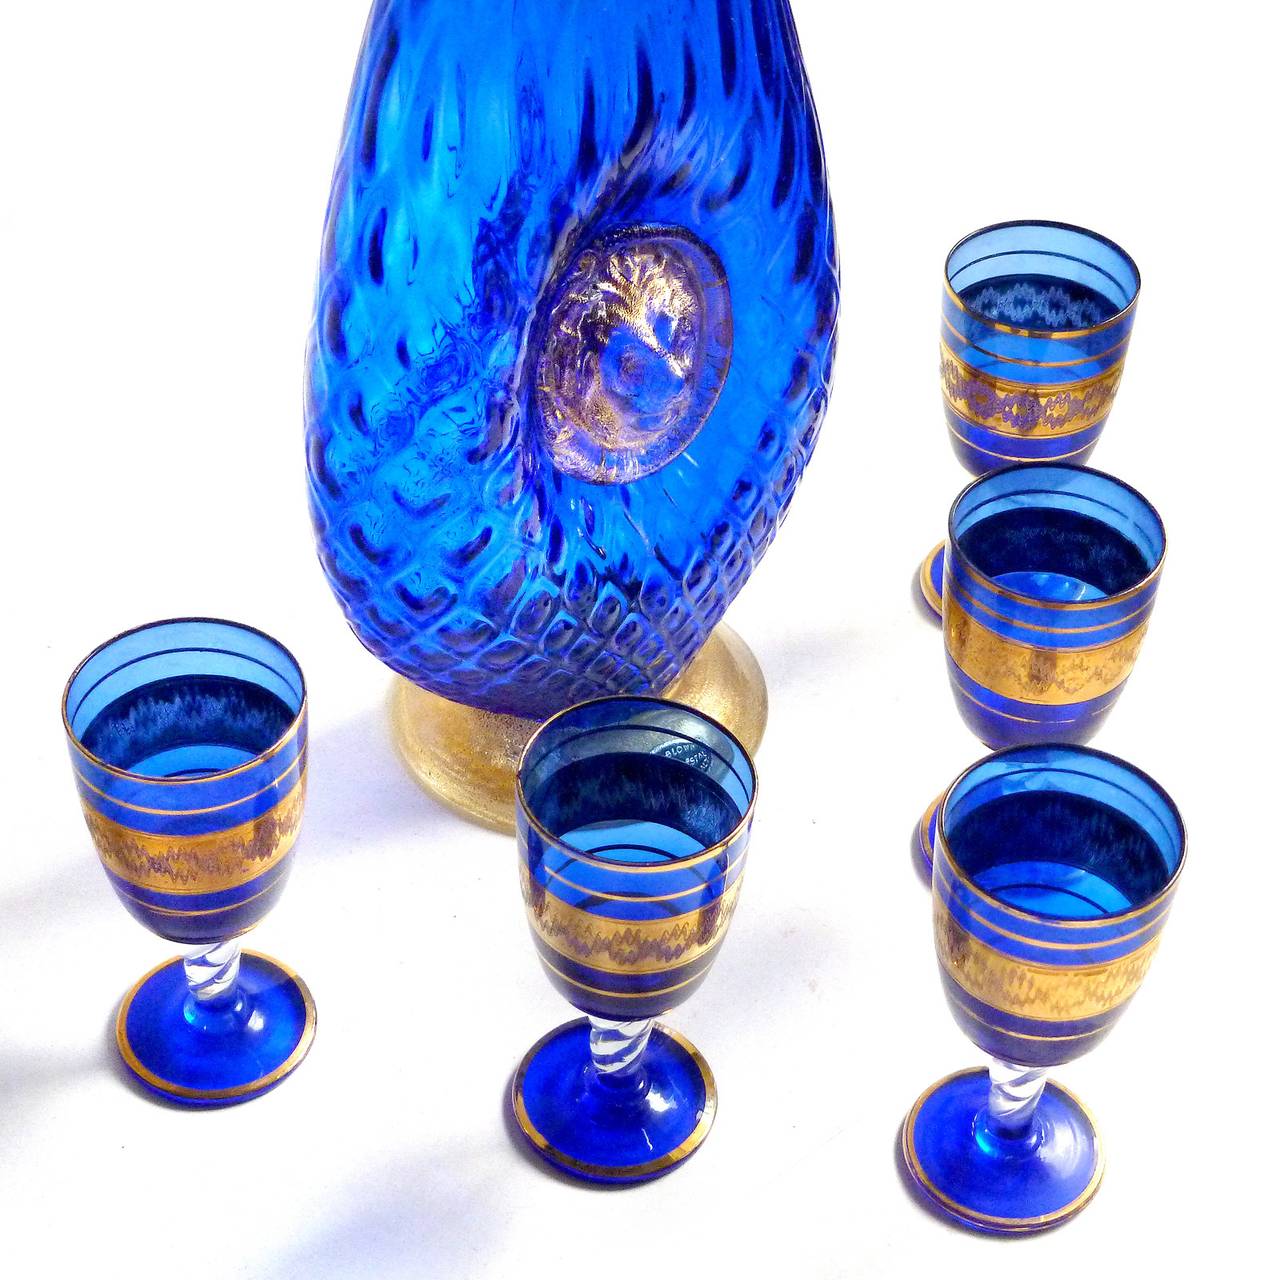 FREE Shipping Worldwide! See details below description.

Gorgeous Murano Hand Blown Rich Sapphire Blue and Gold Flecks Art Glass Lion Head Decanter with Cordials. Documented to the Bischoff liquor company, circa 1950s. The set includes the